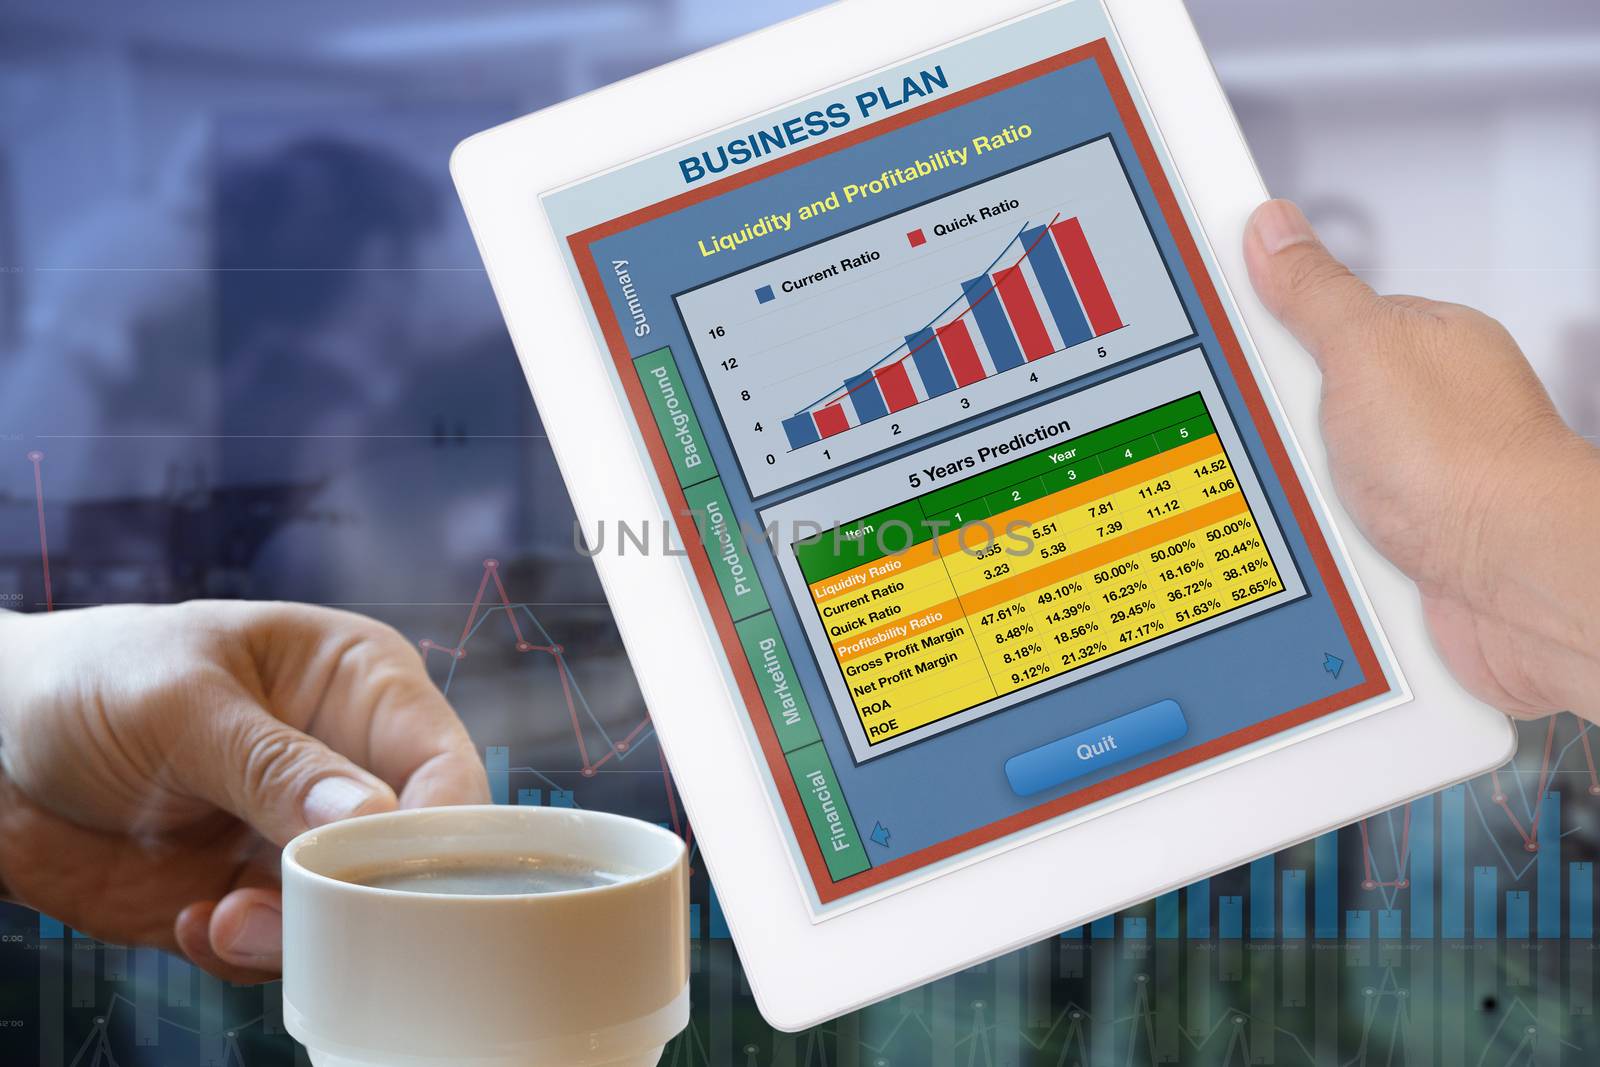 Business plan showing on digital tablet. by pandpstock_002